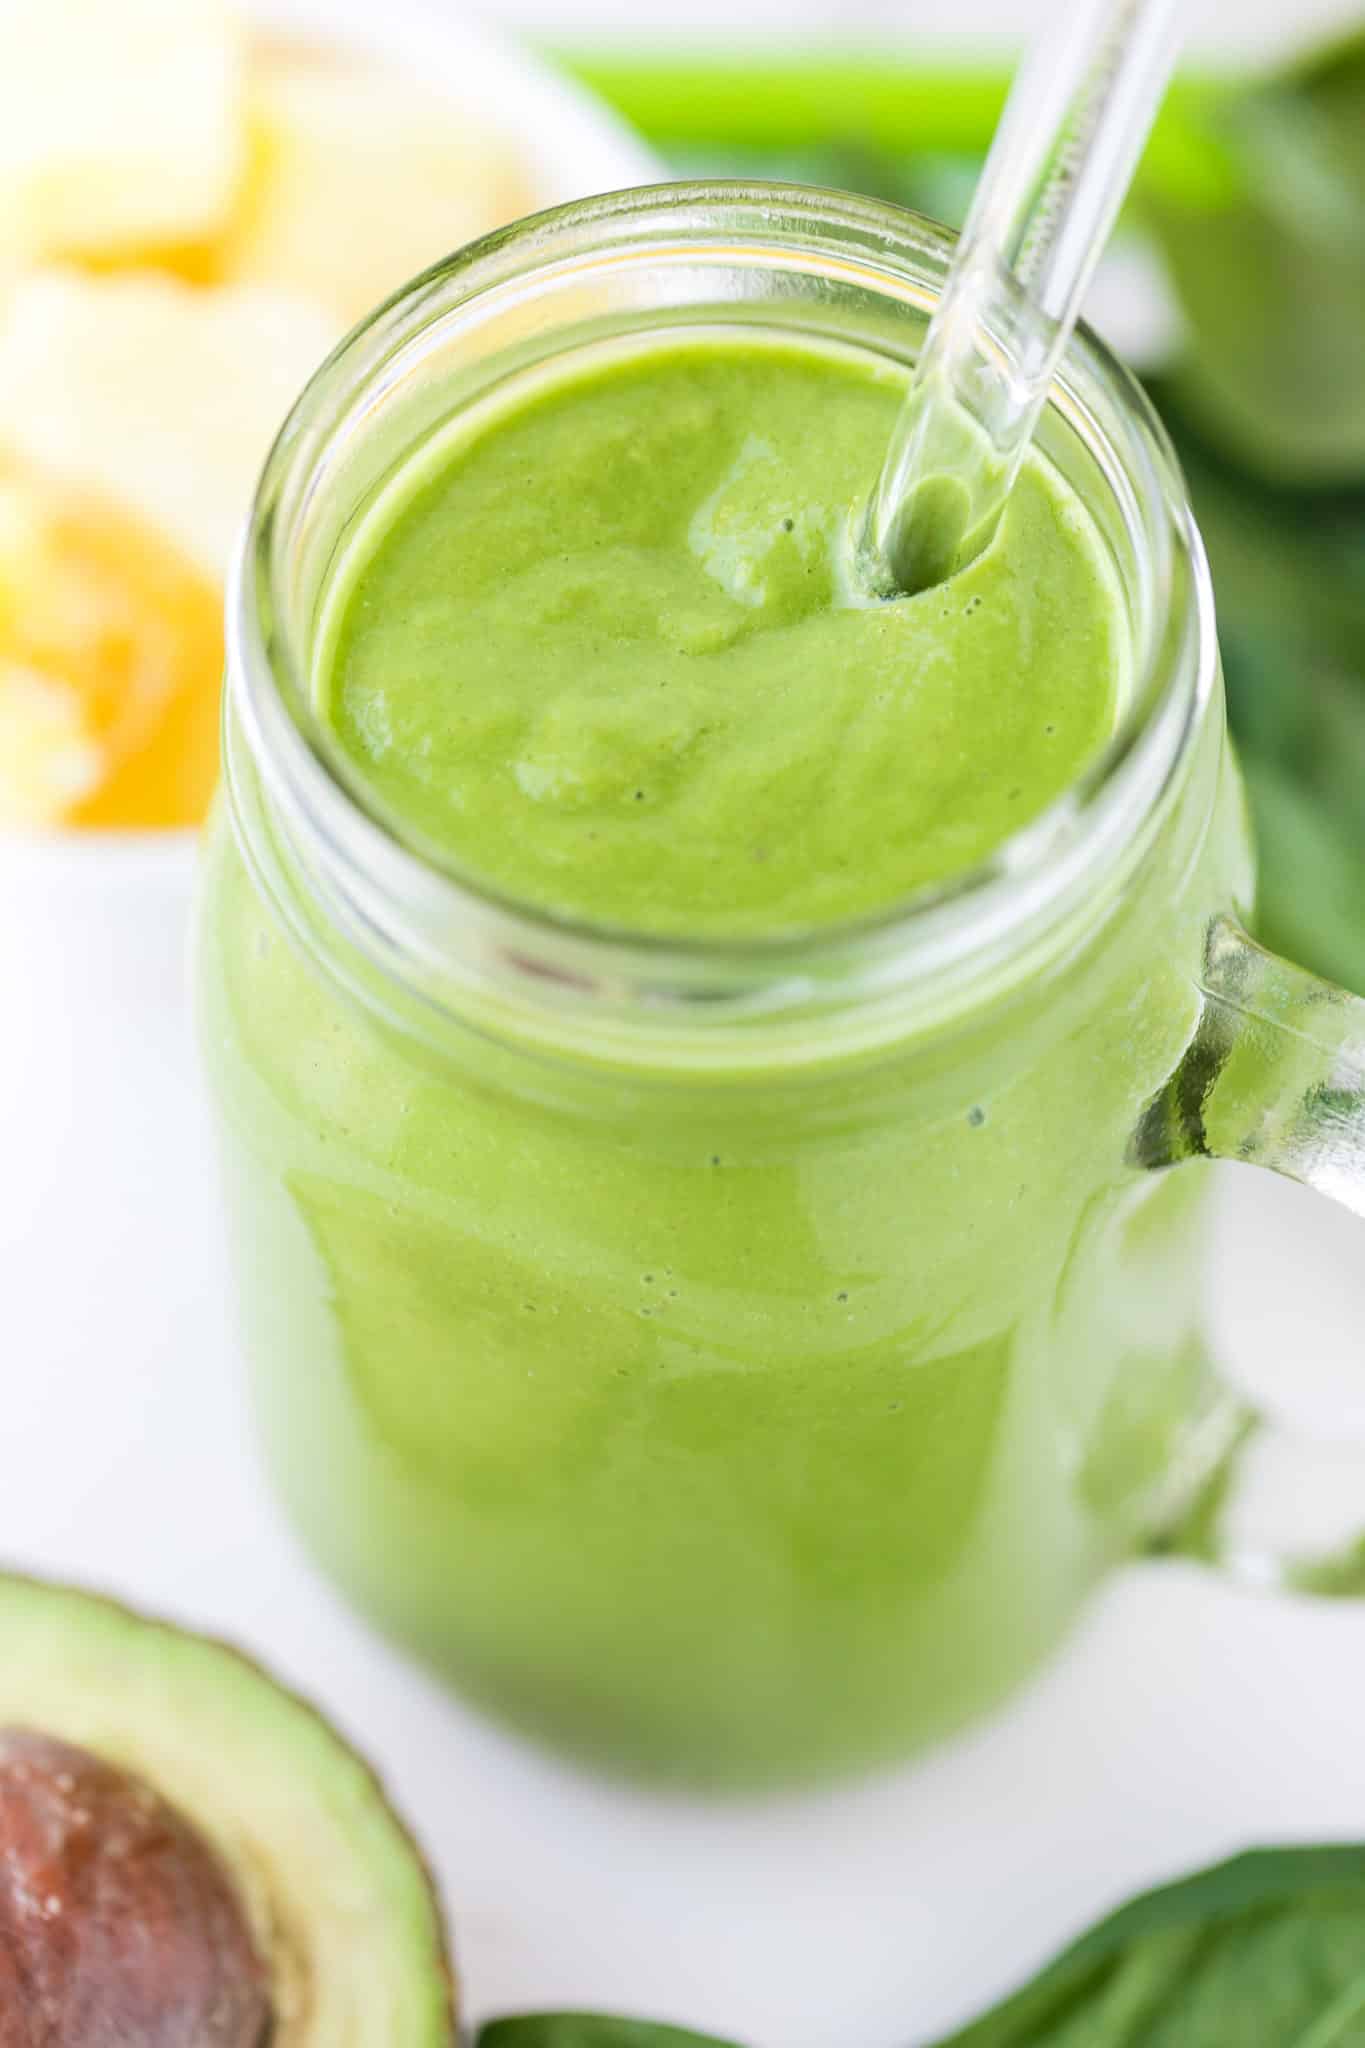 blended green smoothie served in a glass jar